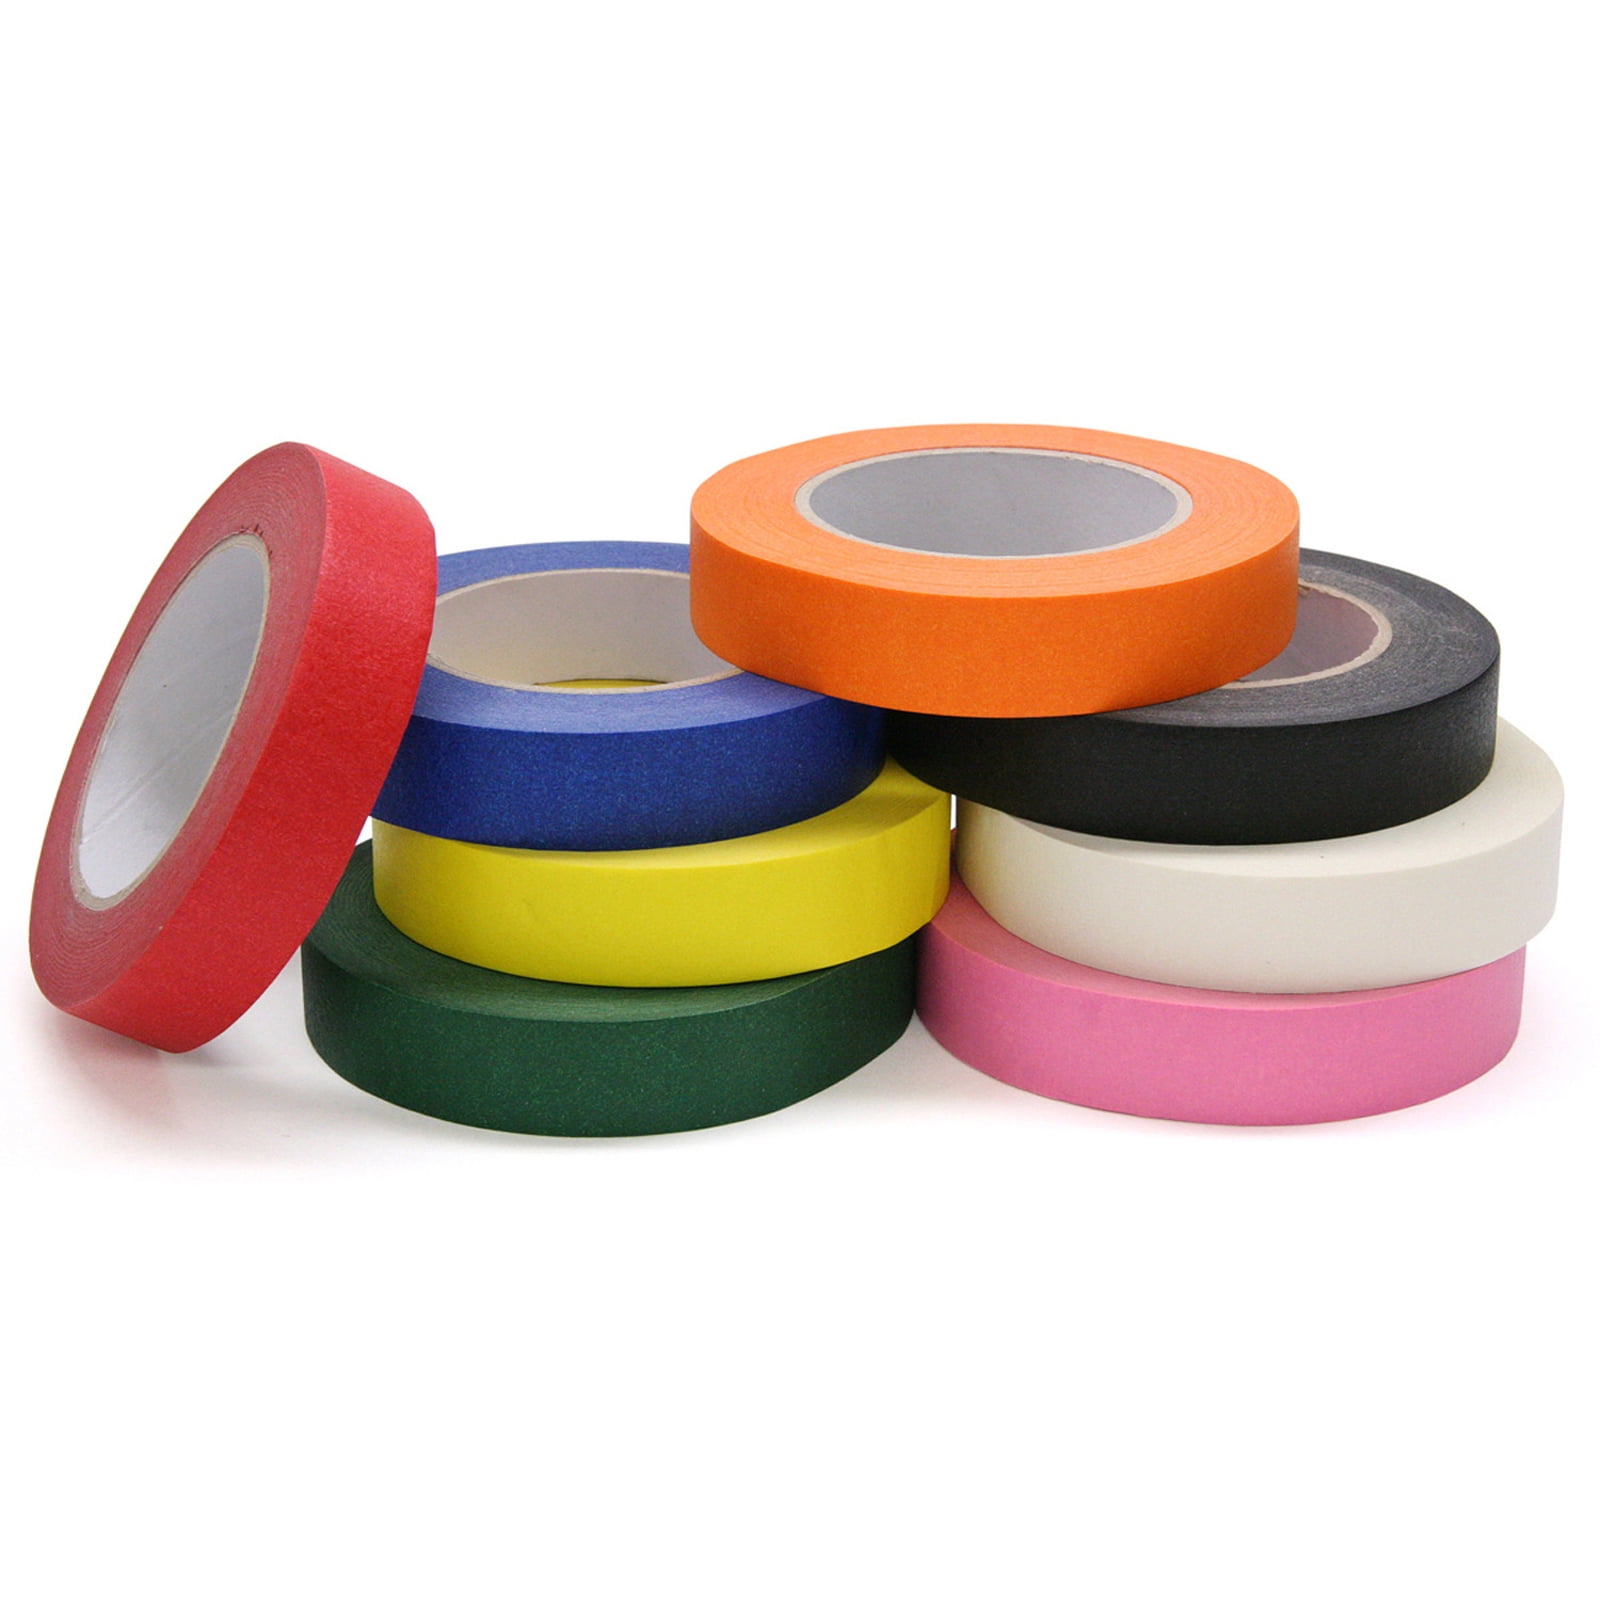 High Temperature Masking Tape: 2 Wide, 60 yd Long, 7 mil Thick, Tan